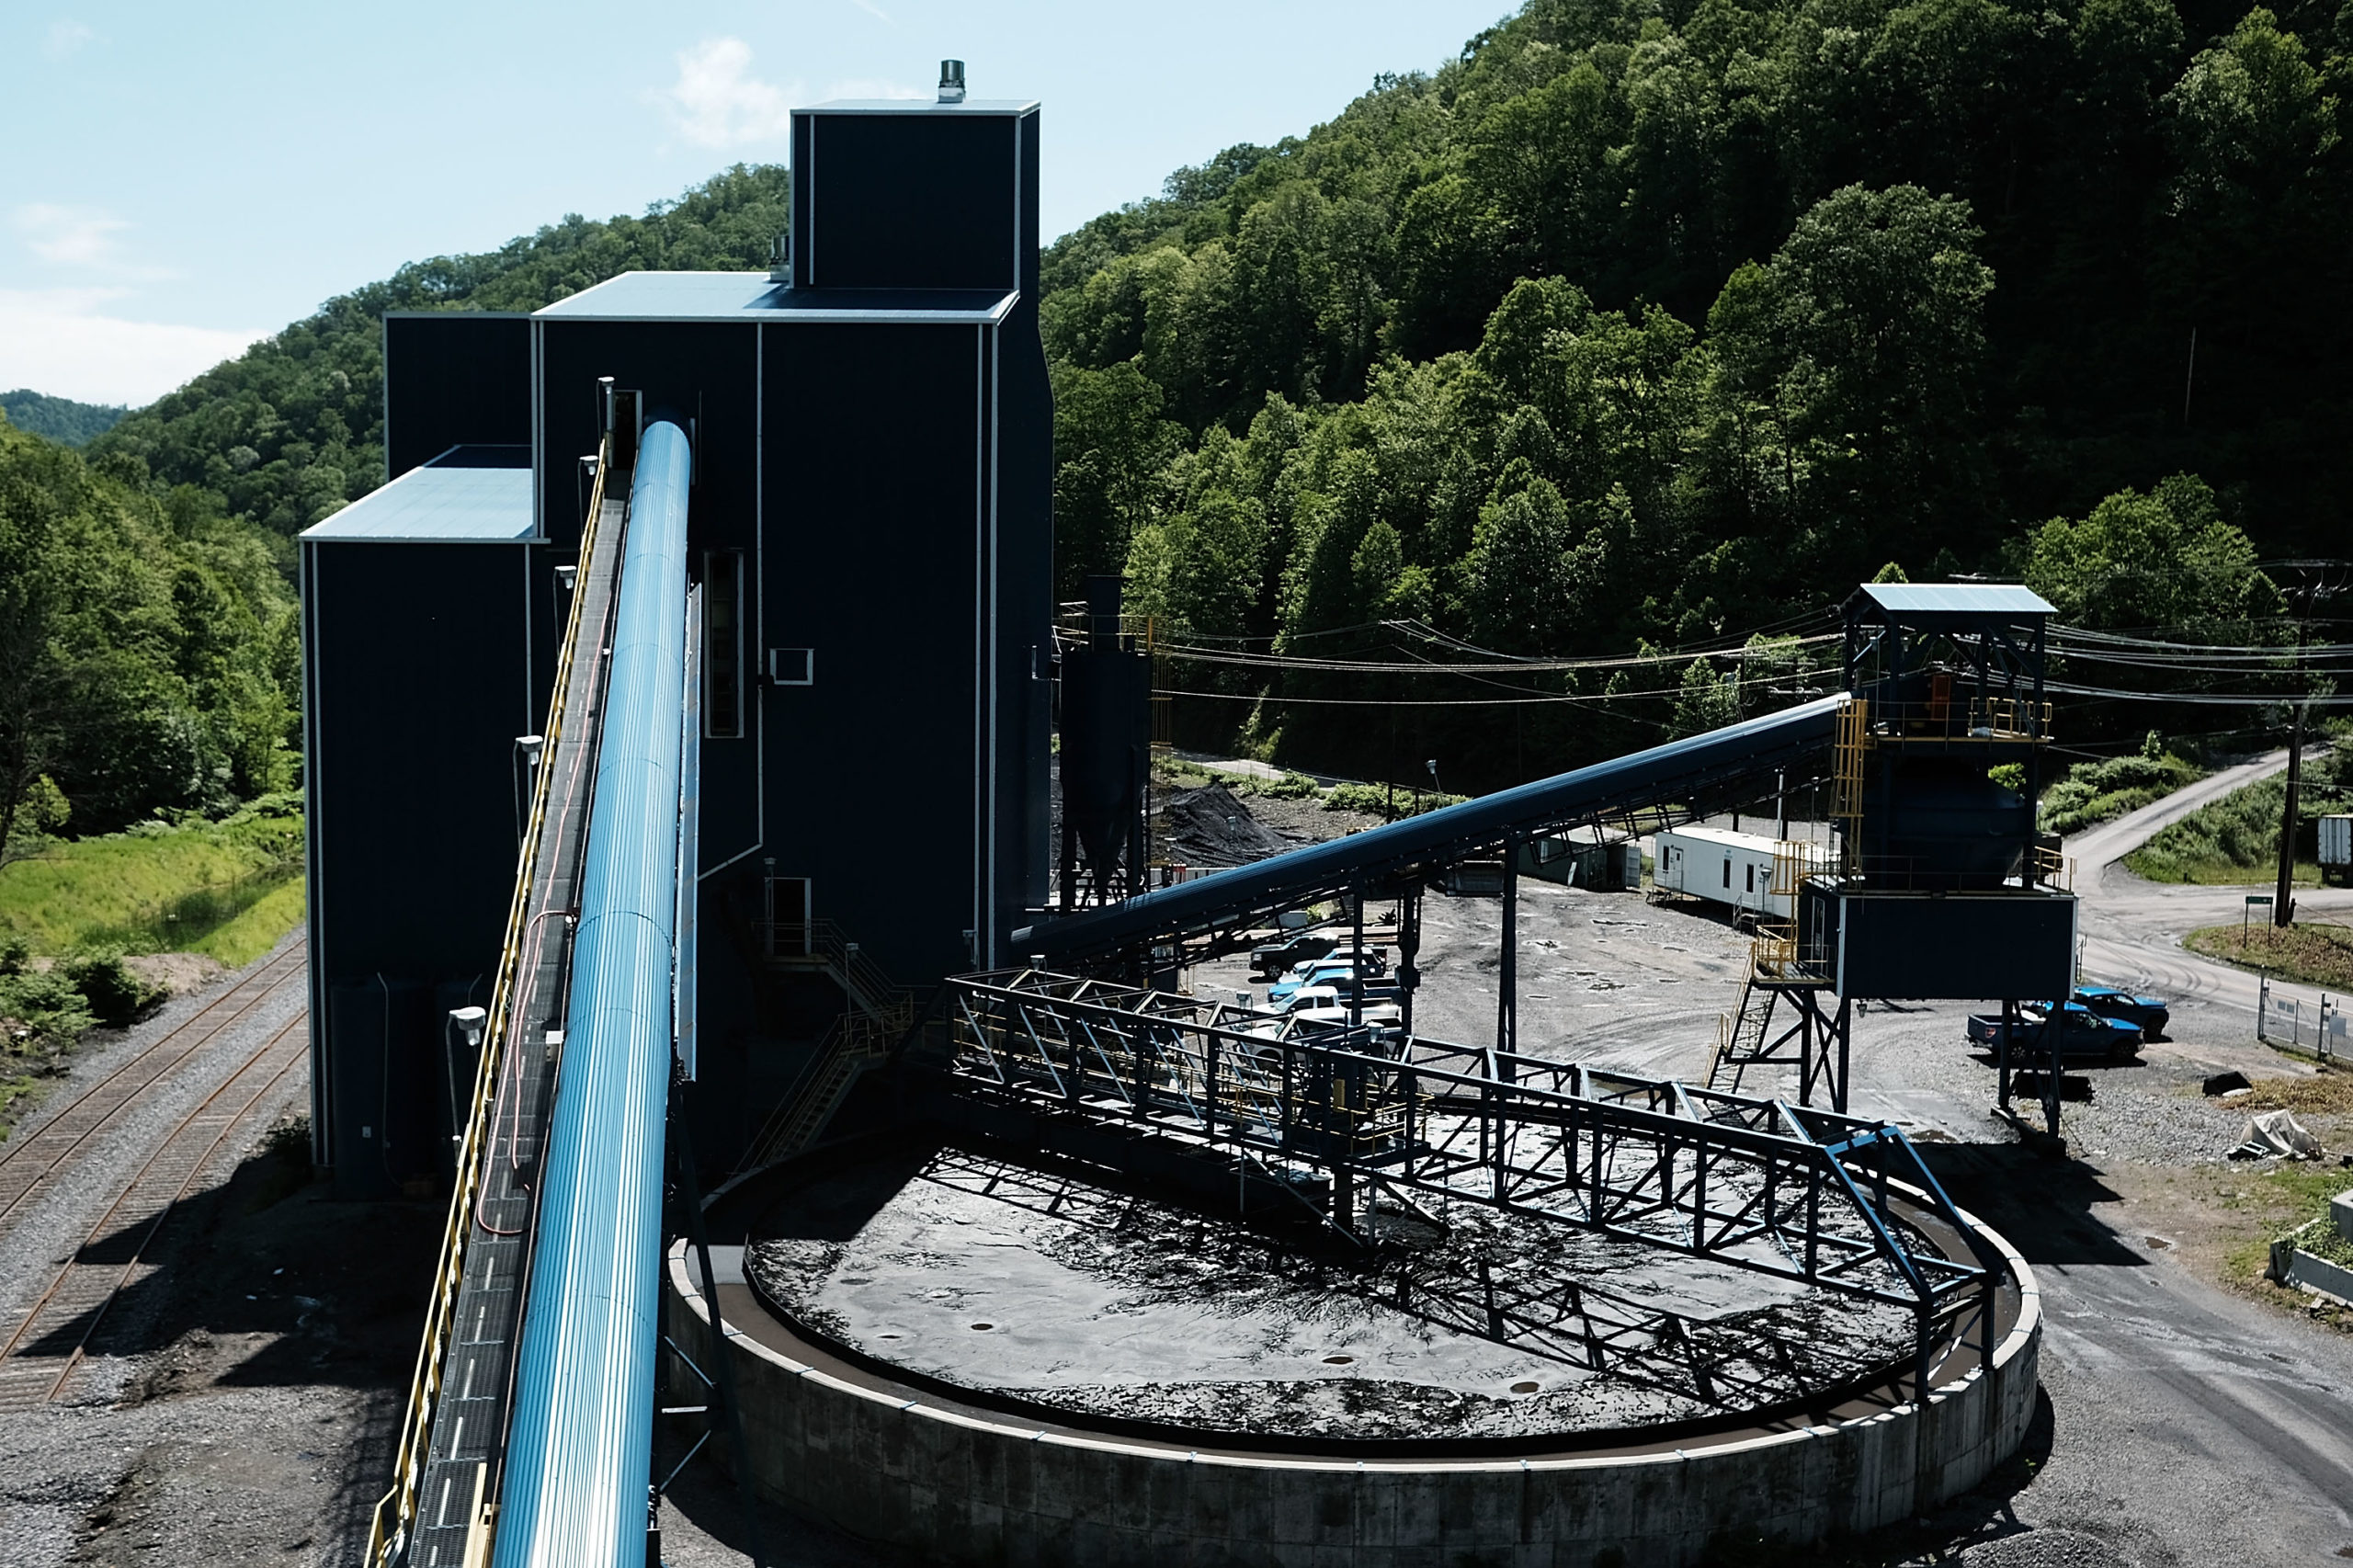 A coal prep plant is pictured near Welch, West Virginia on May 19, 2017. (Spencer Platt/Getty Images)